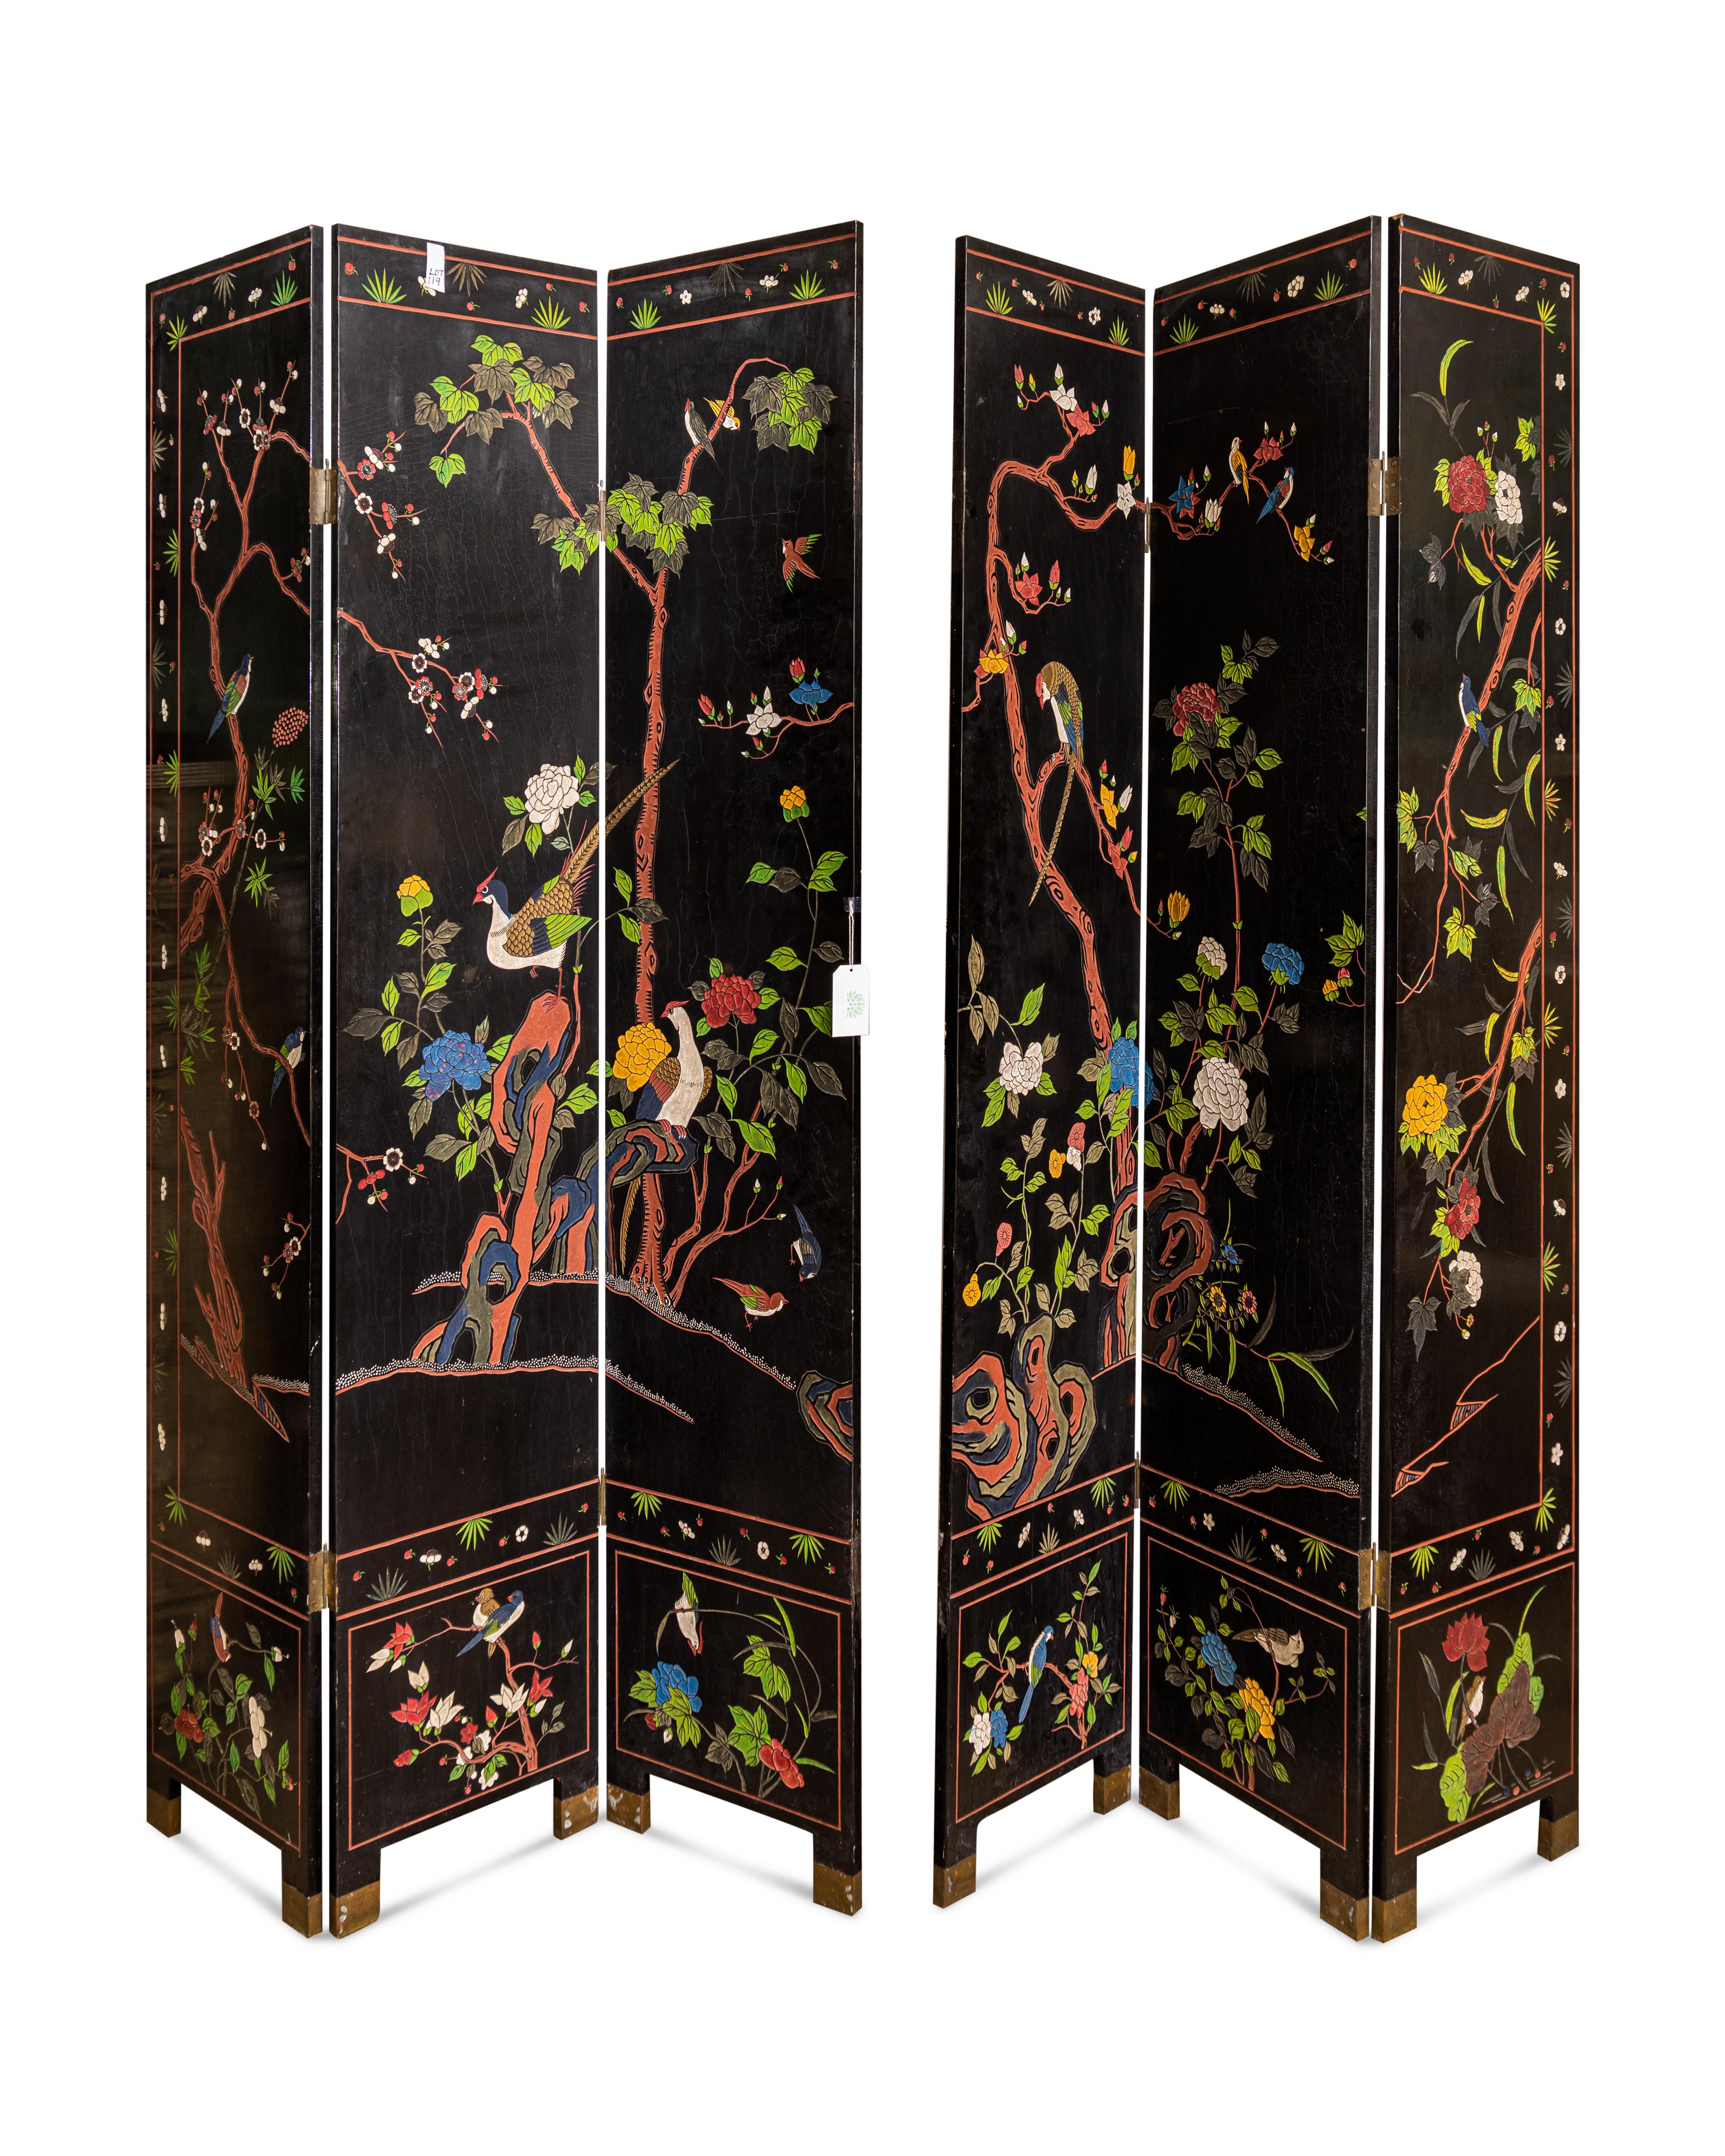 Super Chic pair of vintage Asian 3 Panel black lacquered screens with beautiful carved intricate detail and hand painted. Each side is displaying a different scene, one side is beautiful birds surrounded by flowers and a Tagai forest. The other side